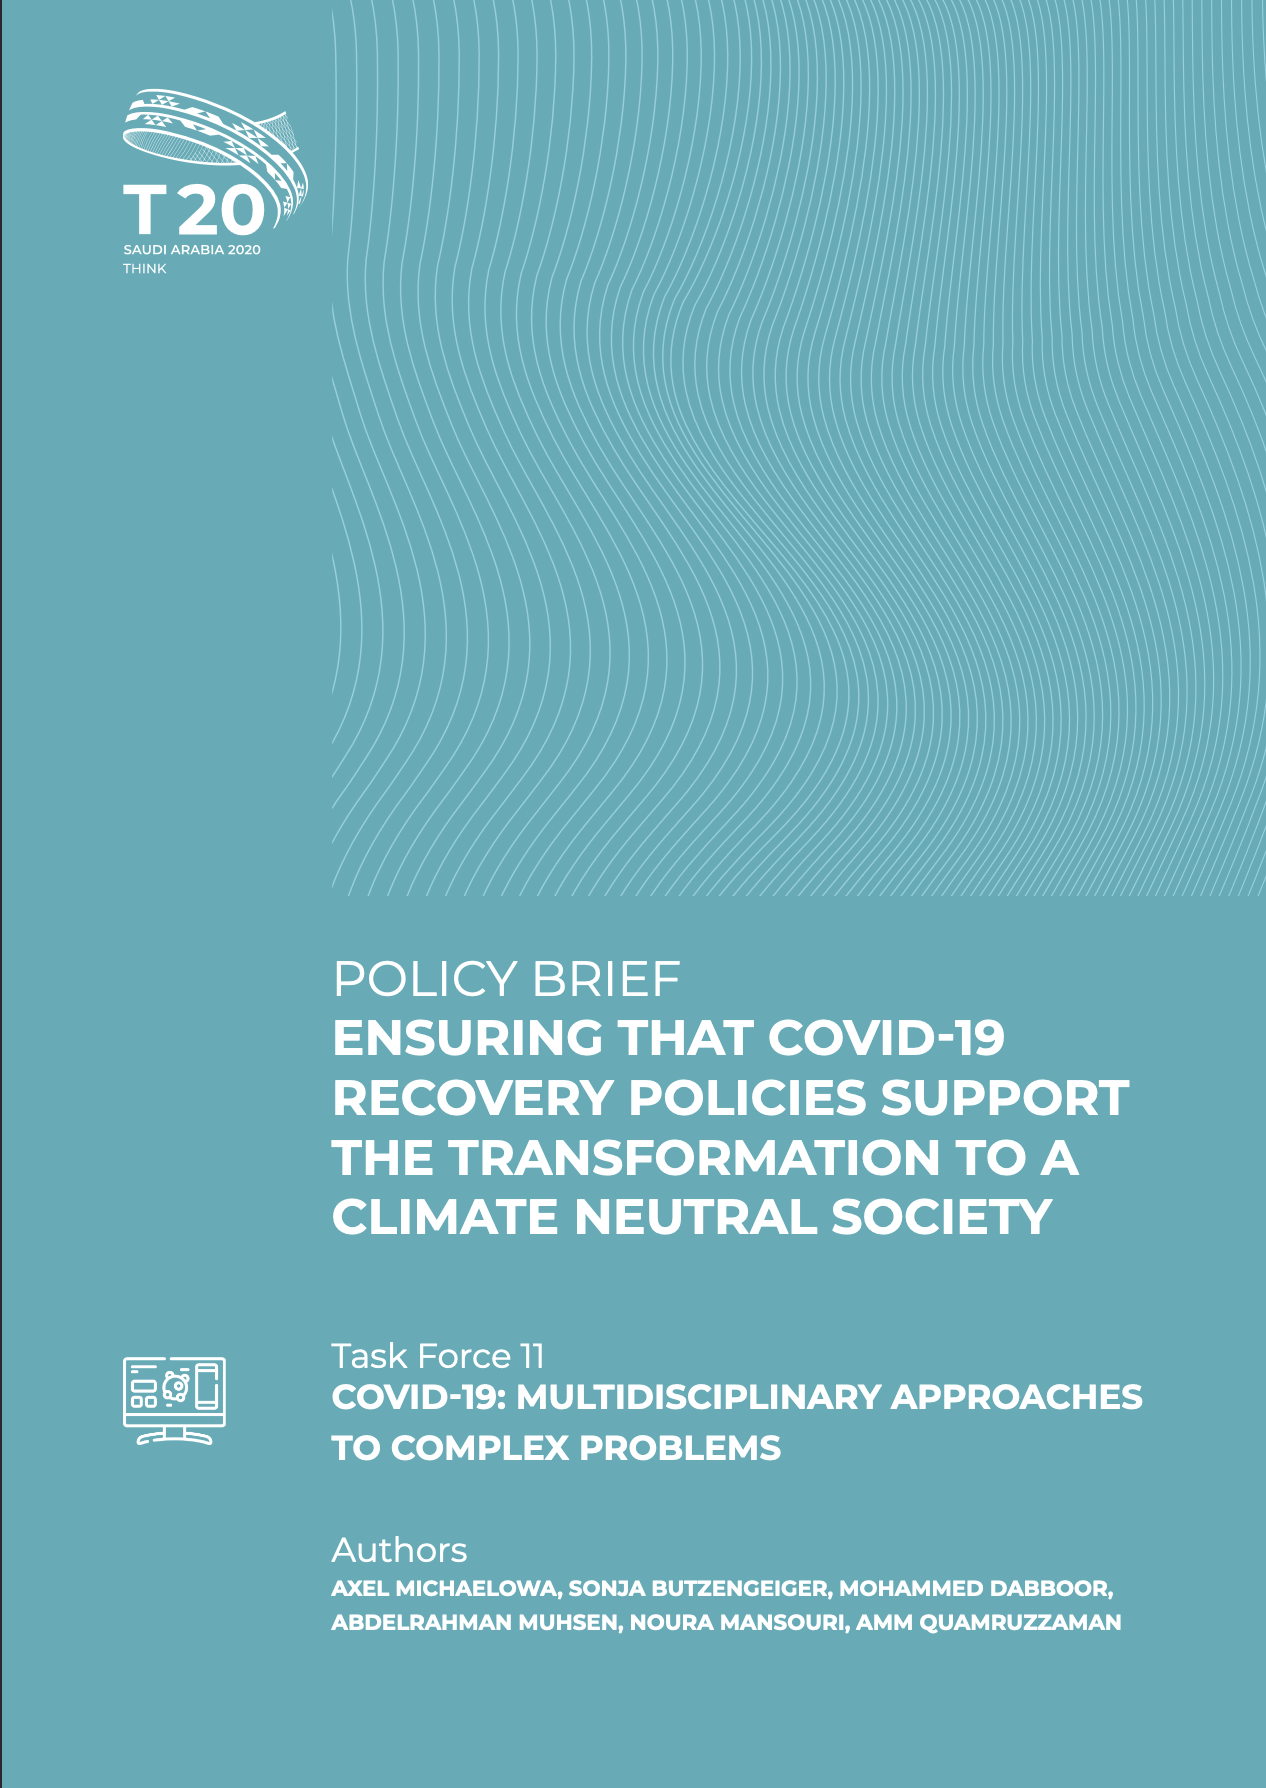 Ensuring That Covid-19 Recovery Policies Support The Transformation To A Climate Neutral Society